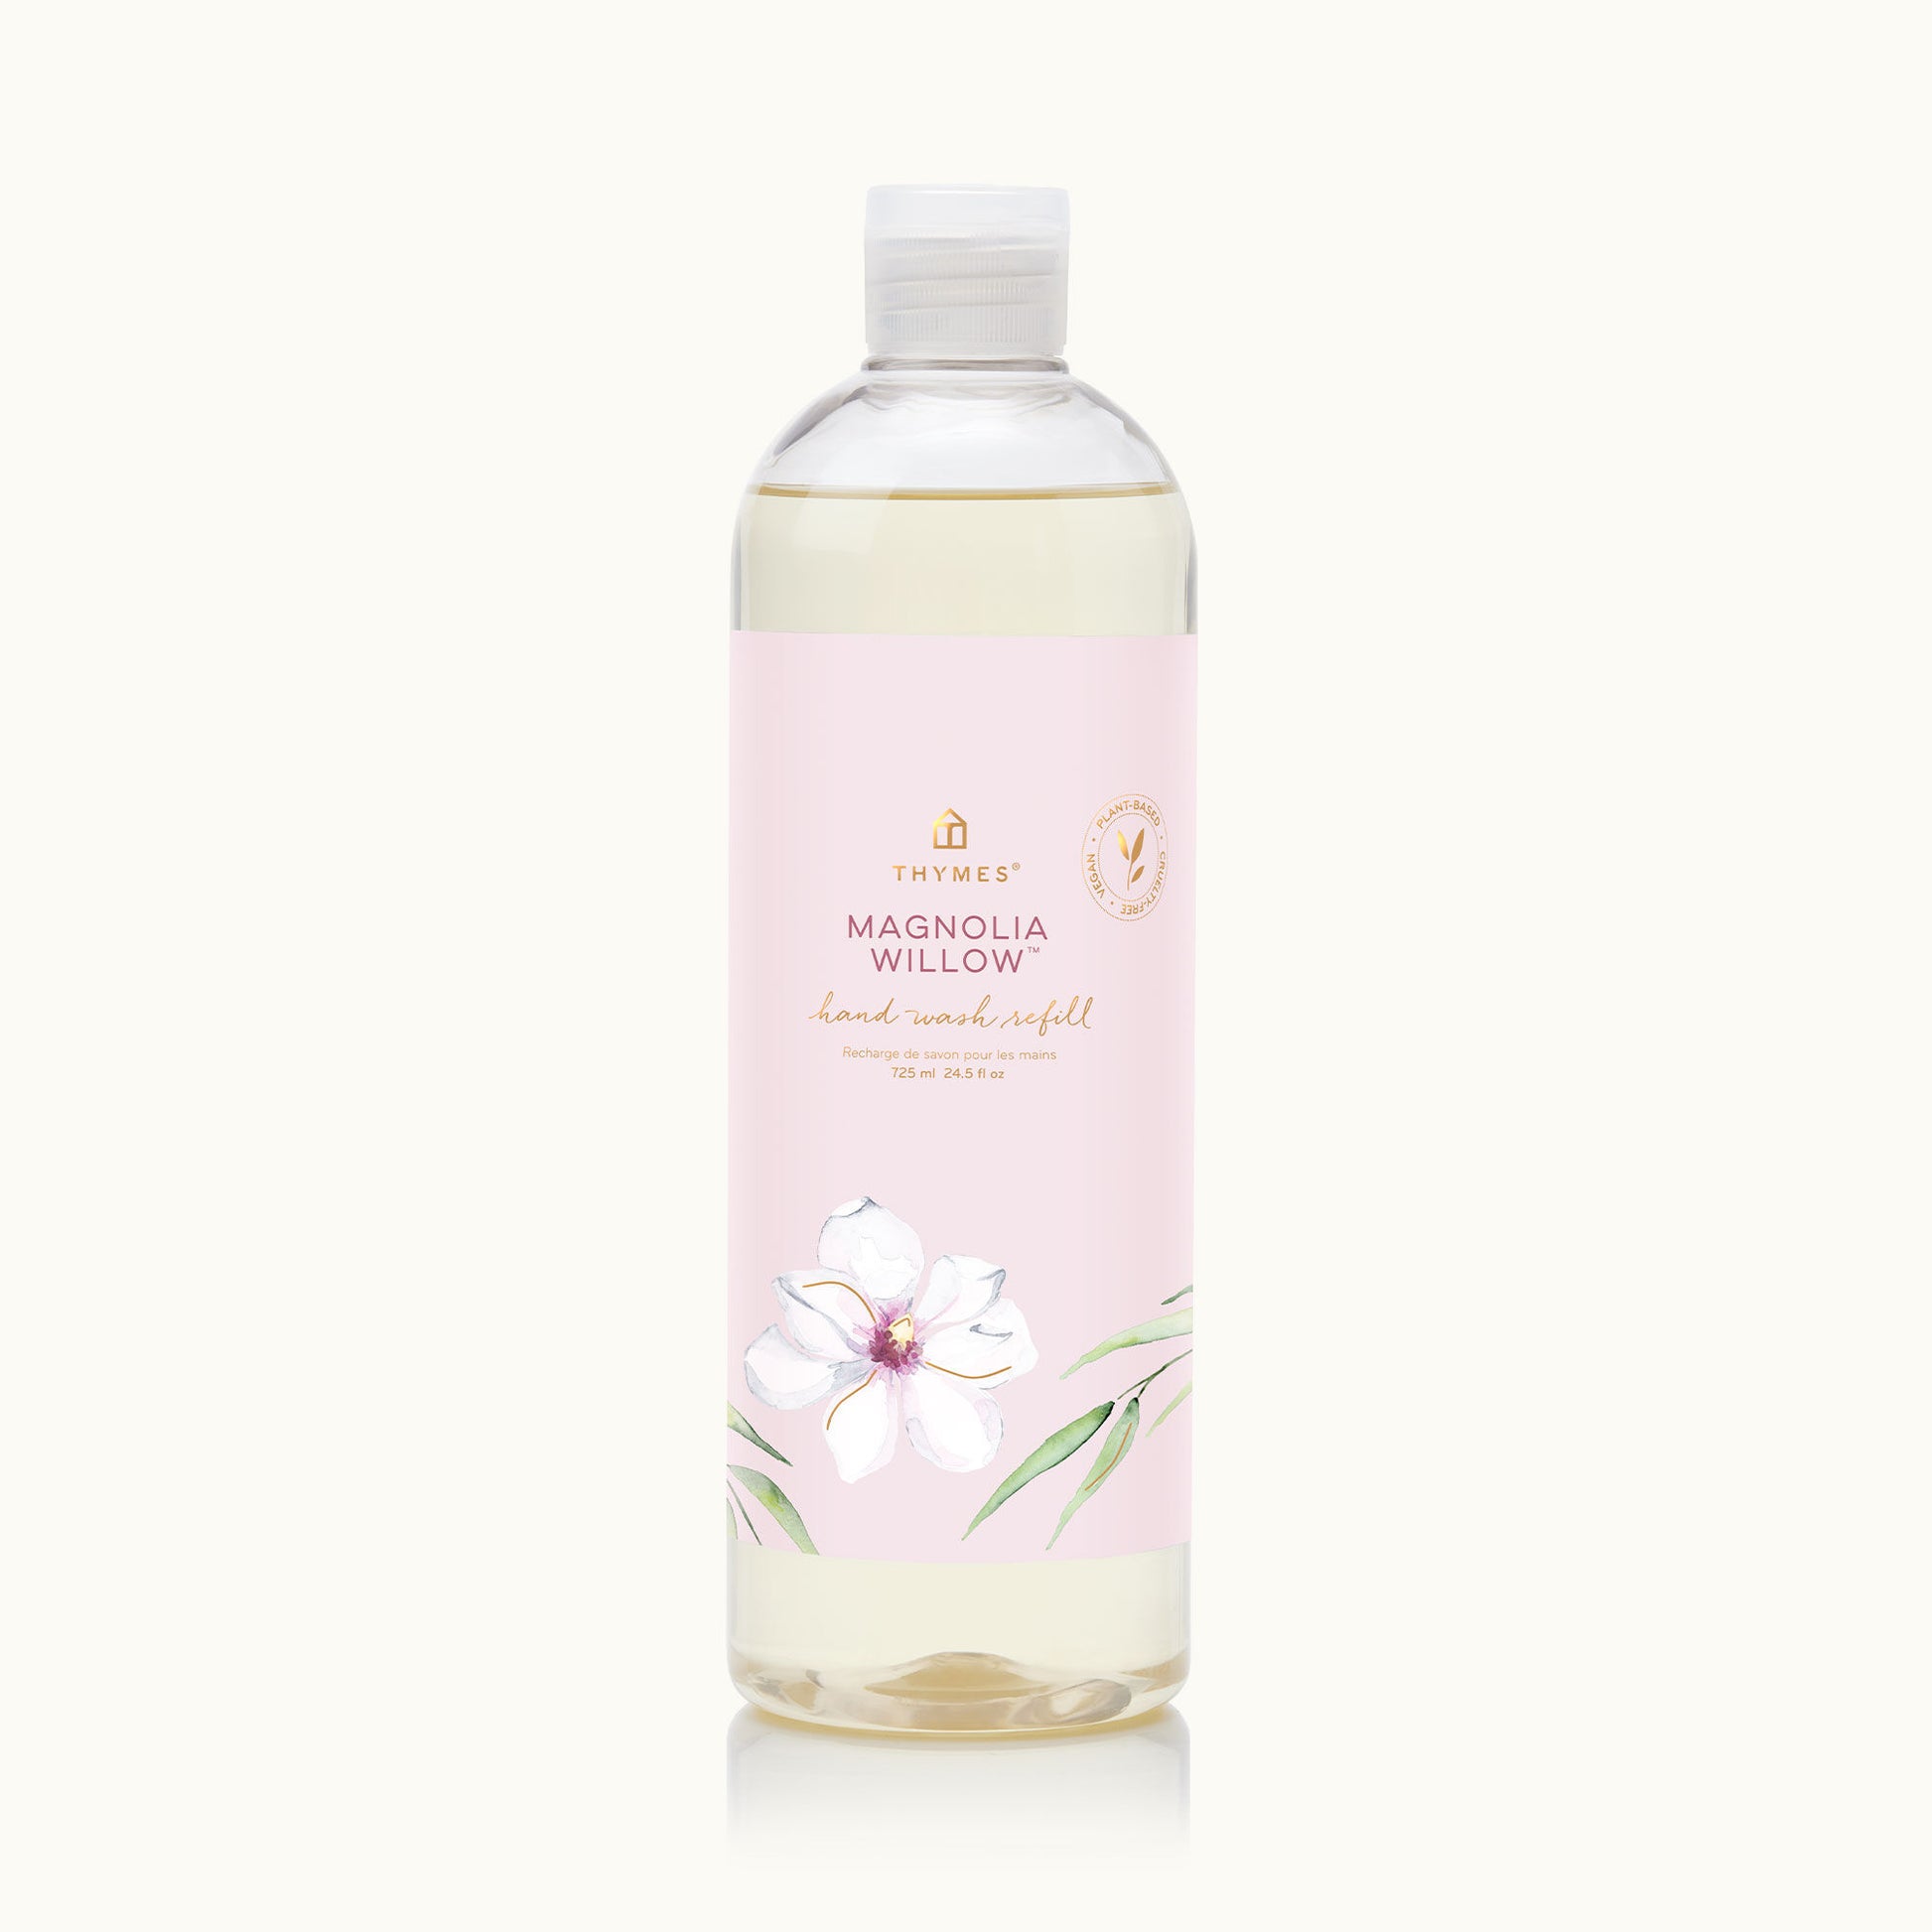 Magnolia Willow Hand Wash Refill Gifts Thymes   